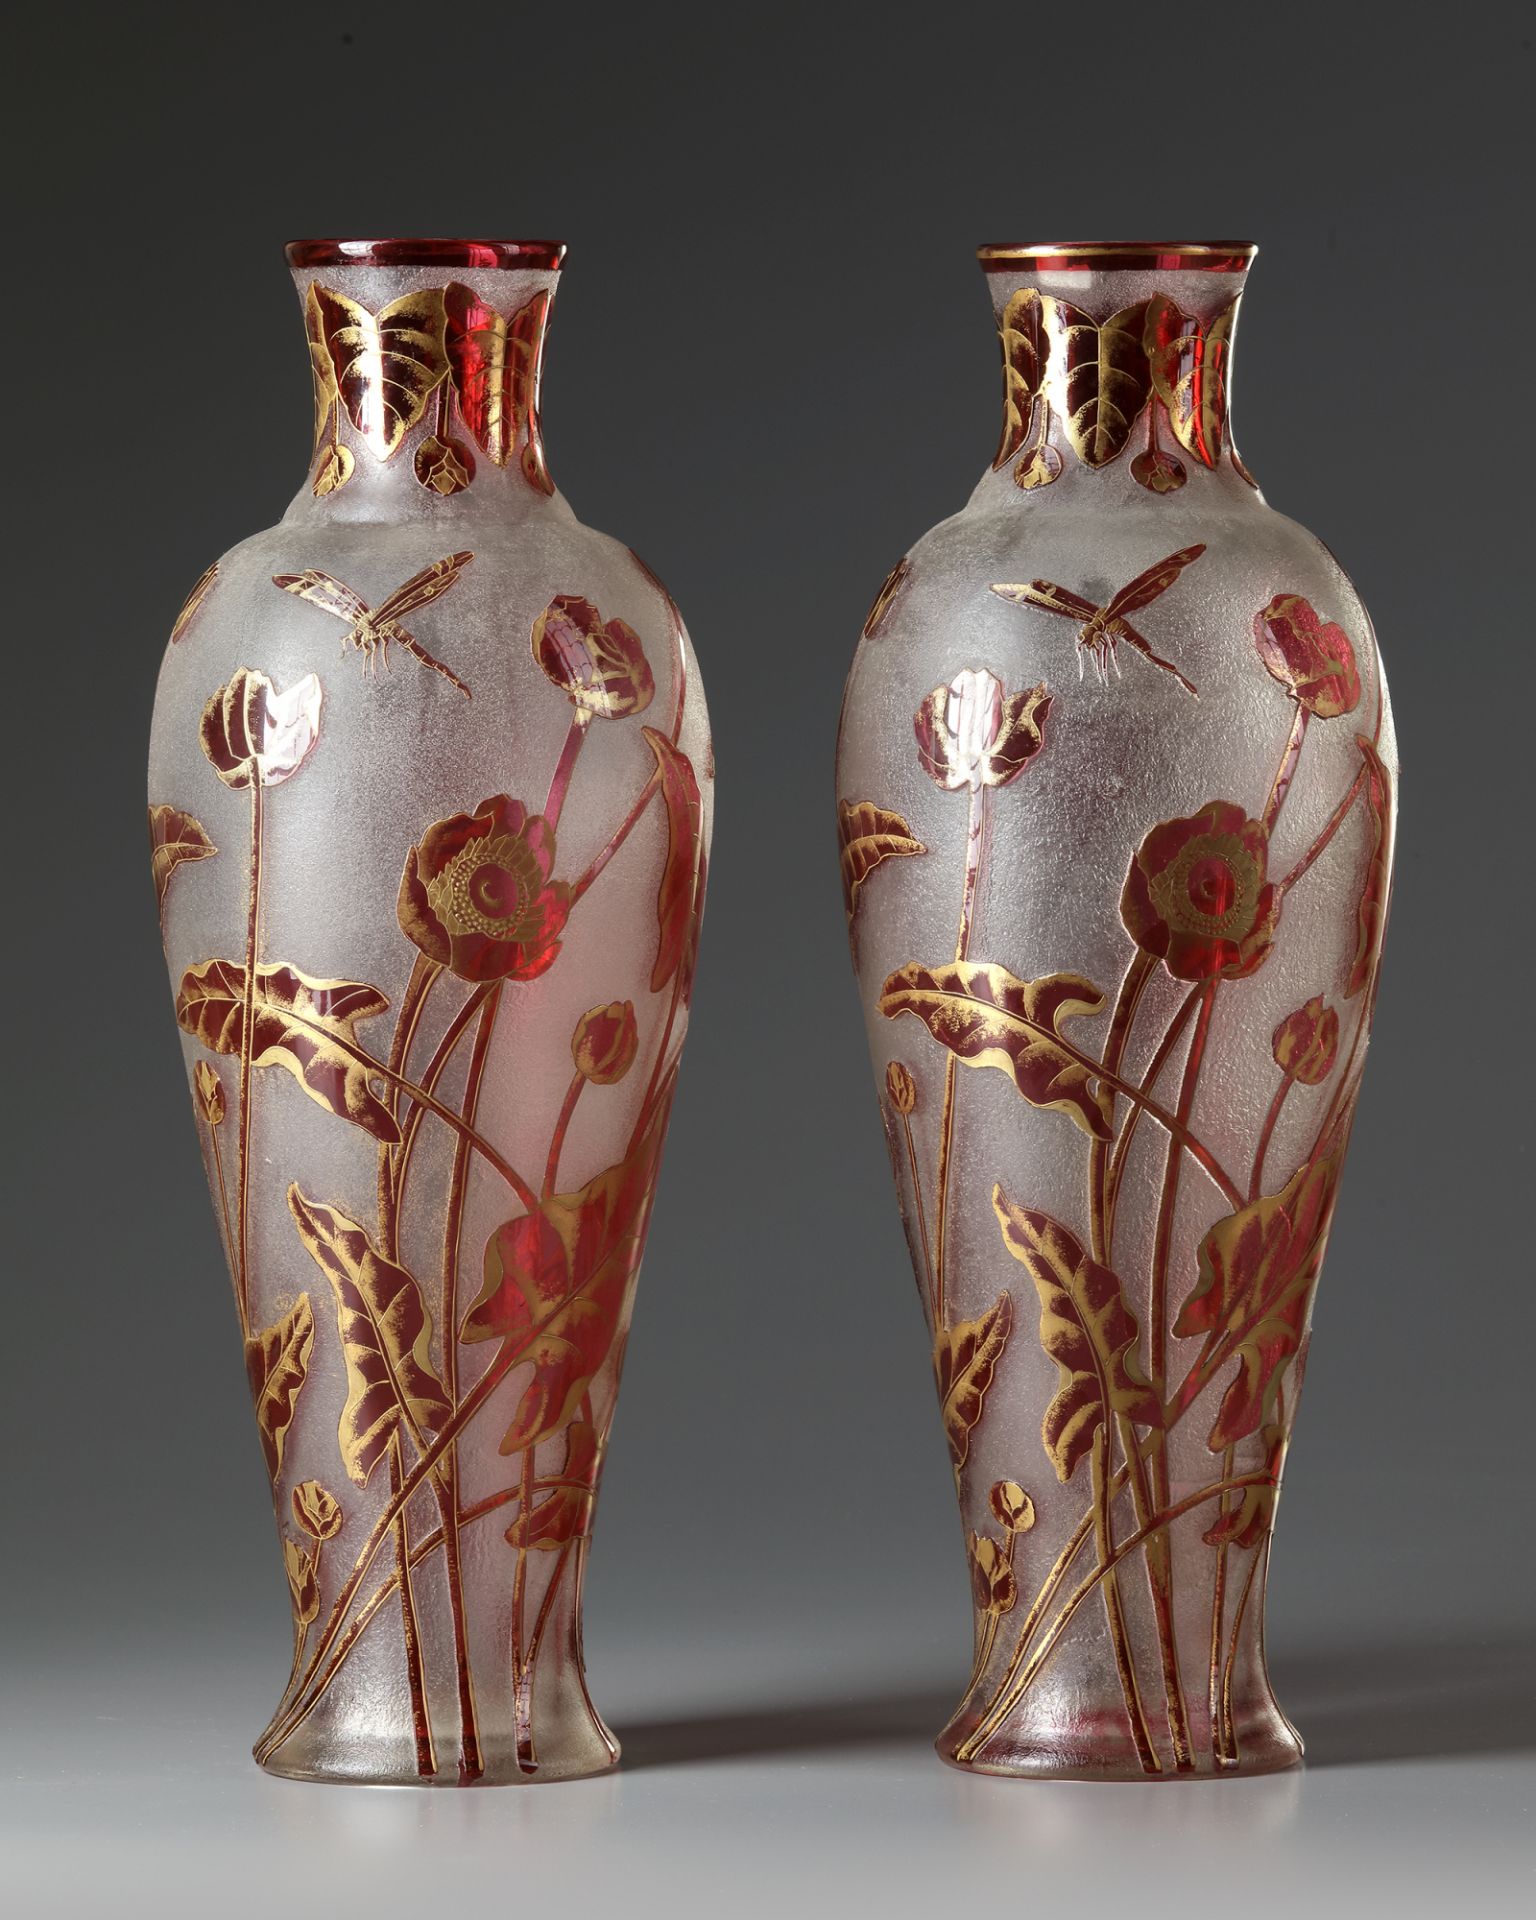 A PAIR OF CRYSTAL VASES, LATE 19TH CENTURY